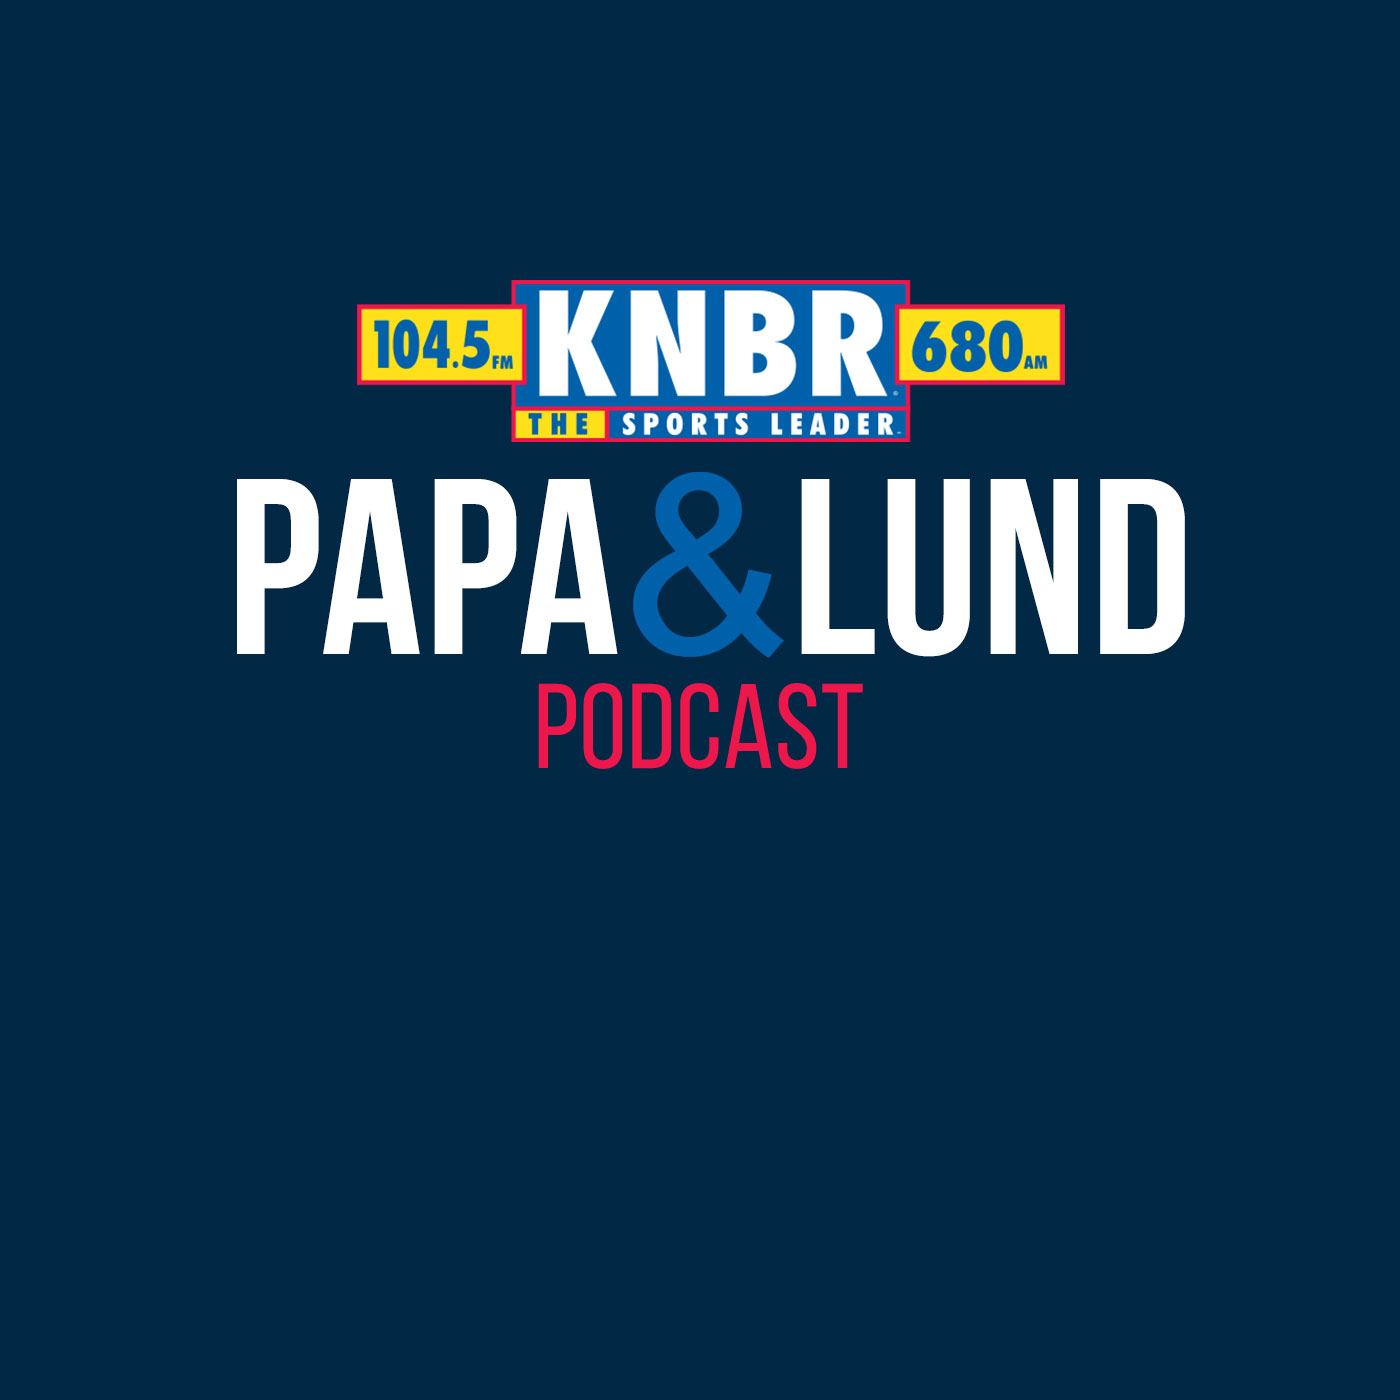 6-7 Chris Rose joins Papa & Lund to discuss where the Giants stand in the National League and gives his thoughts on the possibility of robo umps to be utilized in the future